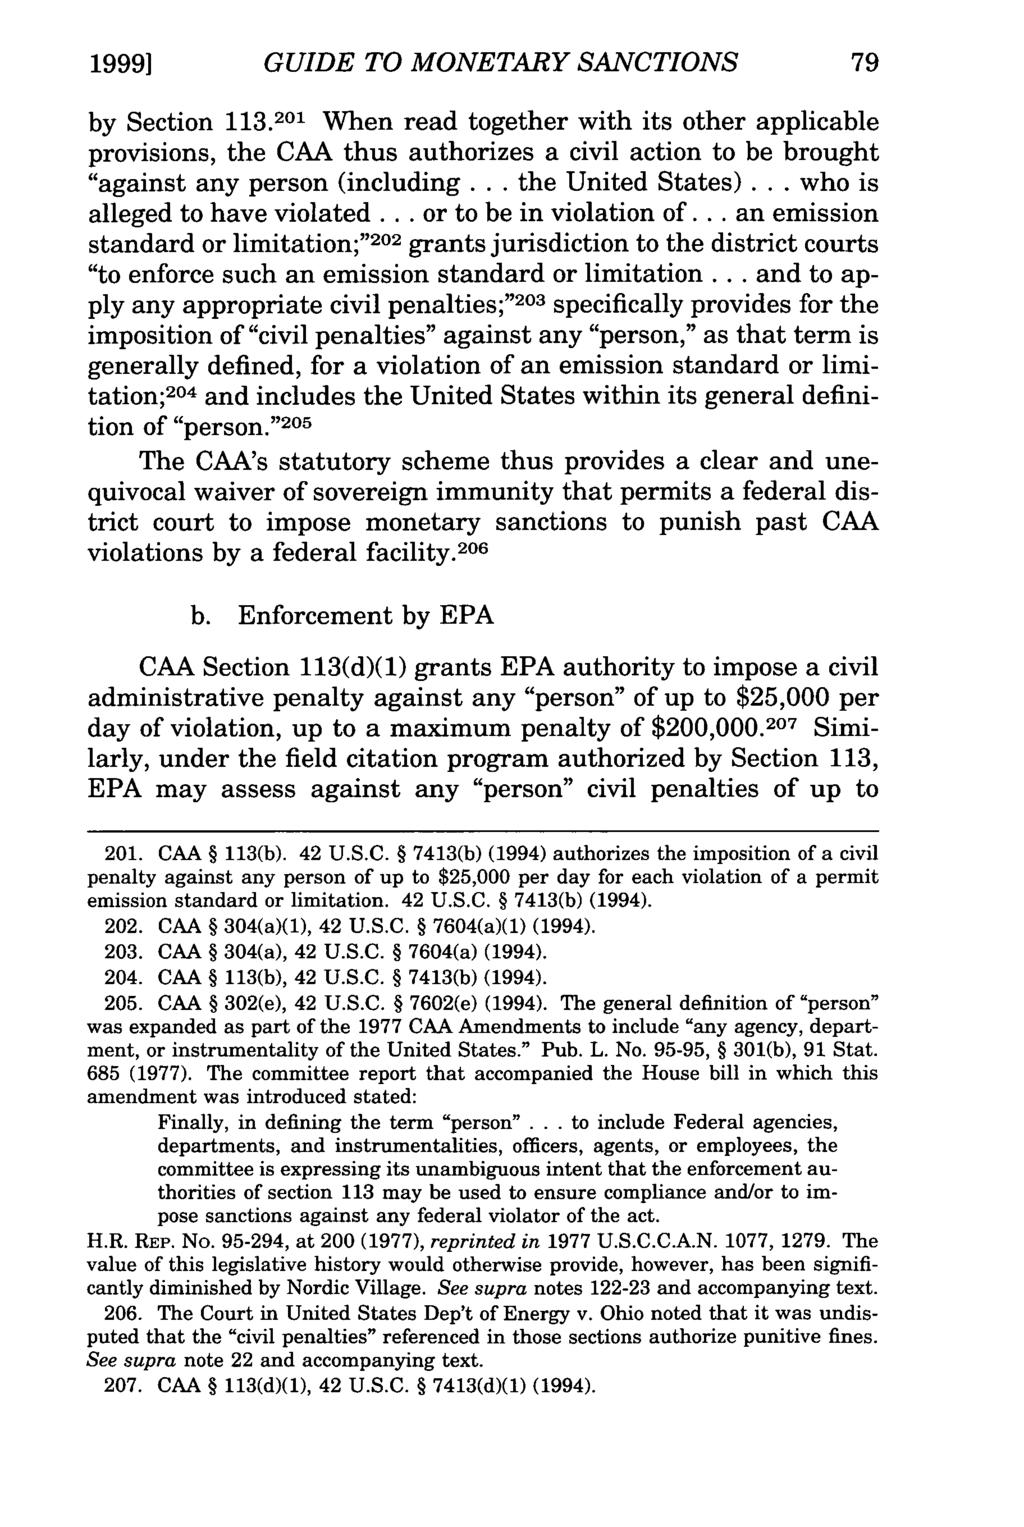 1999] GUIDE TO MONETARY SANCTIONS by Section 113.201 When read together with its other applicable provisions, the CAA thus authorizes a civil action to be brought "against any person (including.